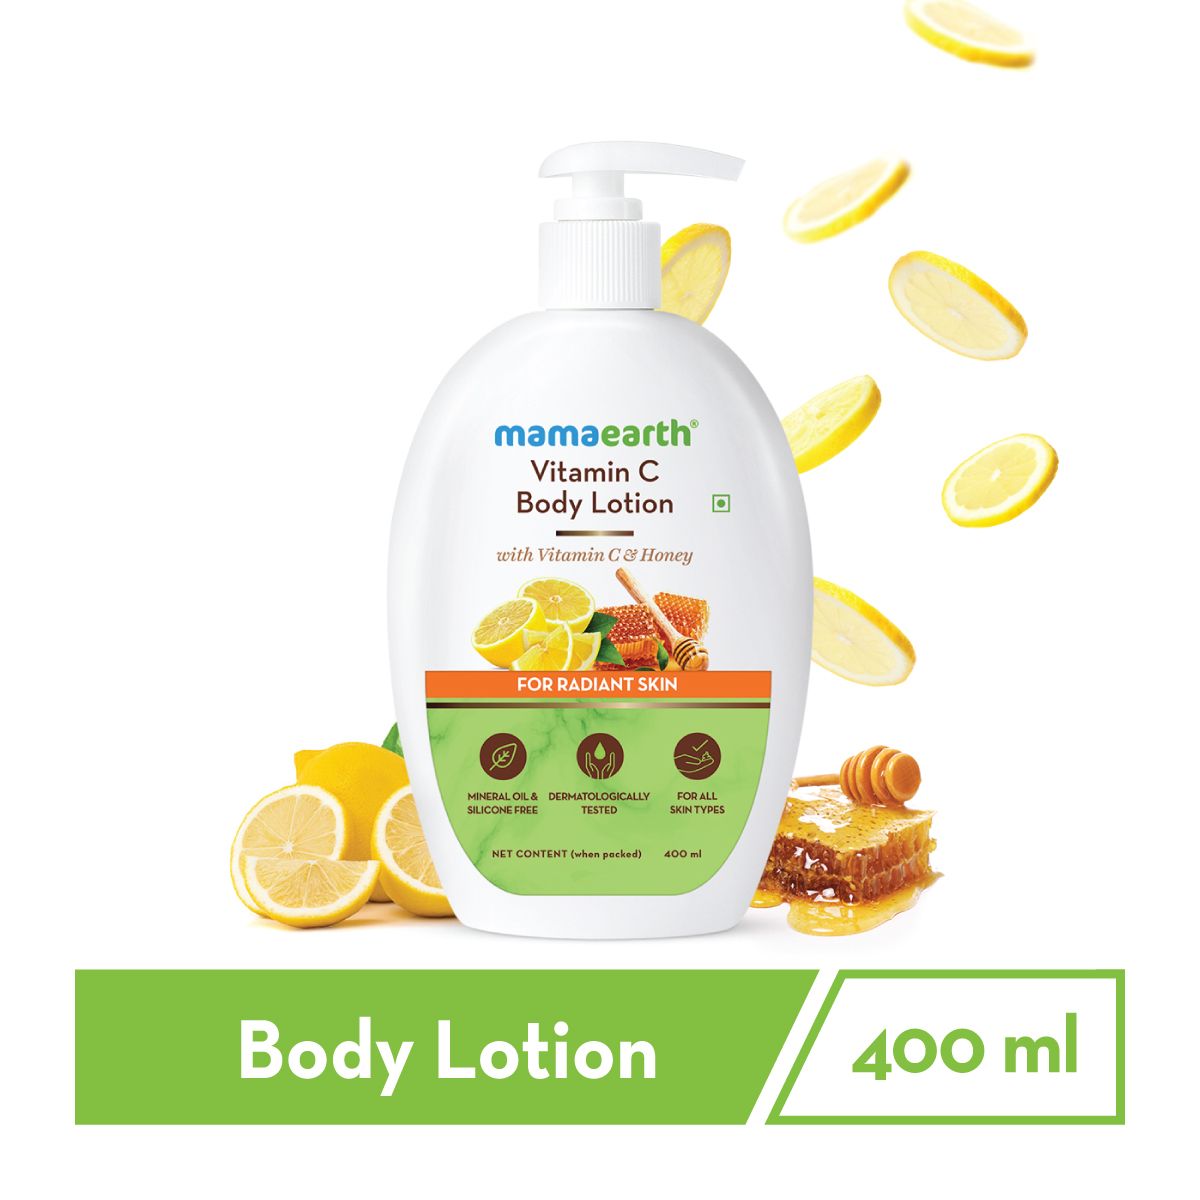 Mamaearth Vitamin C Body Lotion Better Than Others Available In The Market